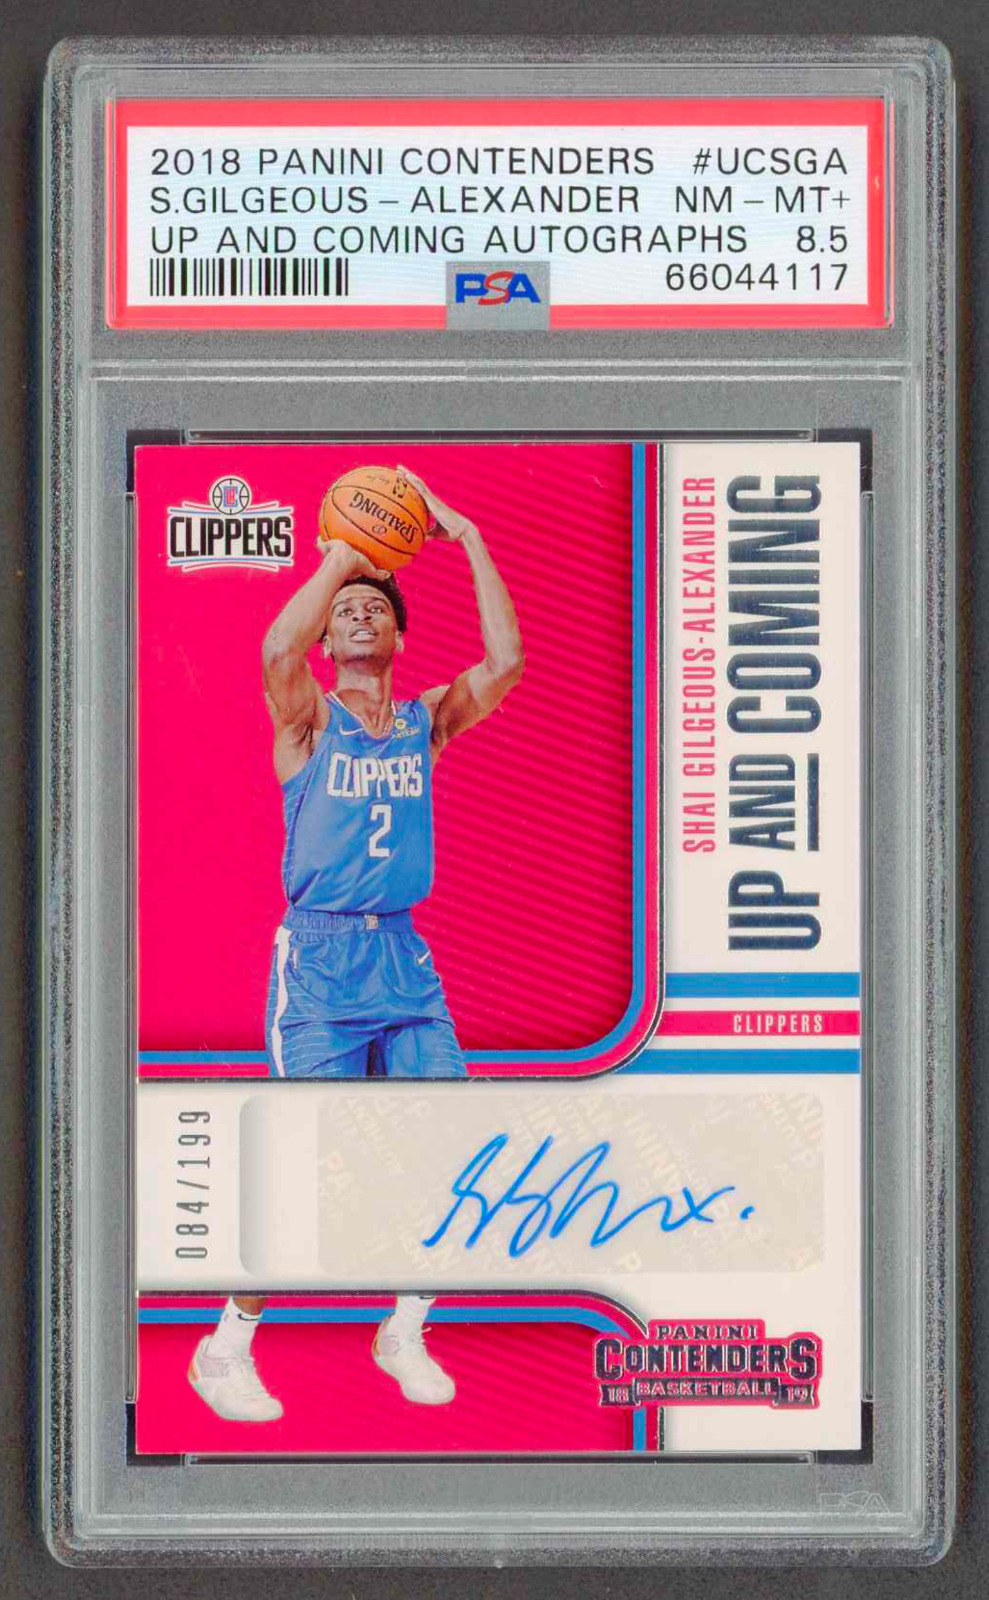 2018-19 Contenders Up & Coming Auto Shai Gilgeous-Alexander RC /199 PSA 8.5